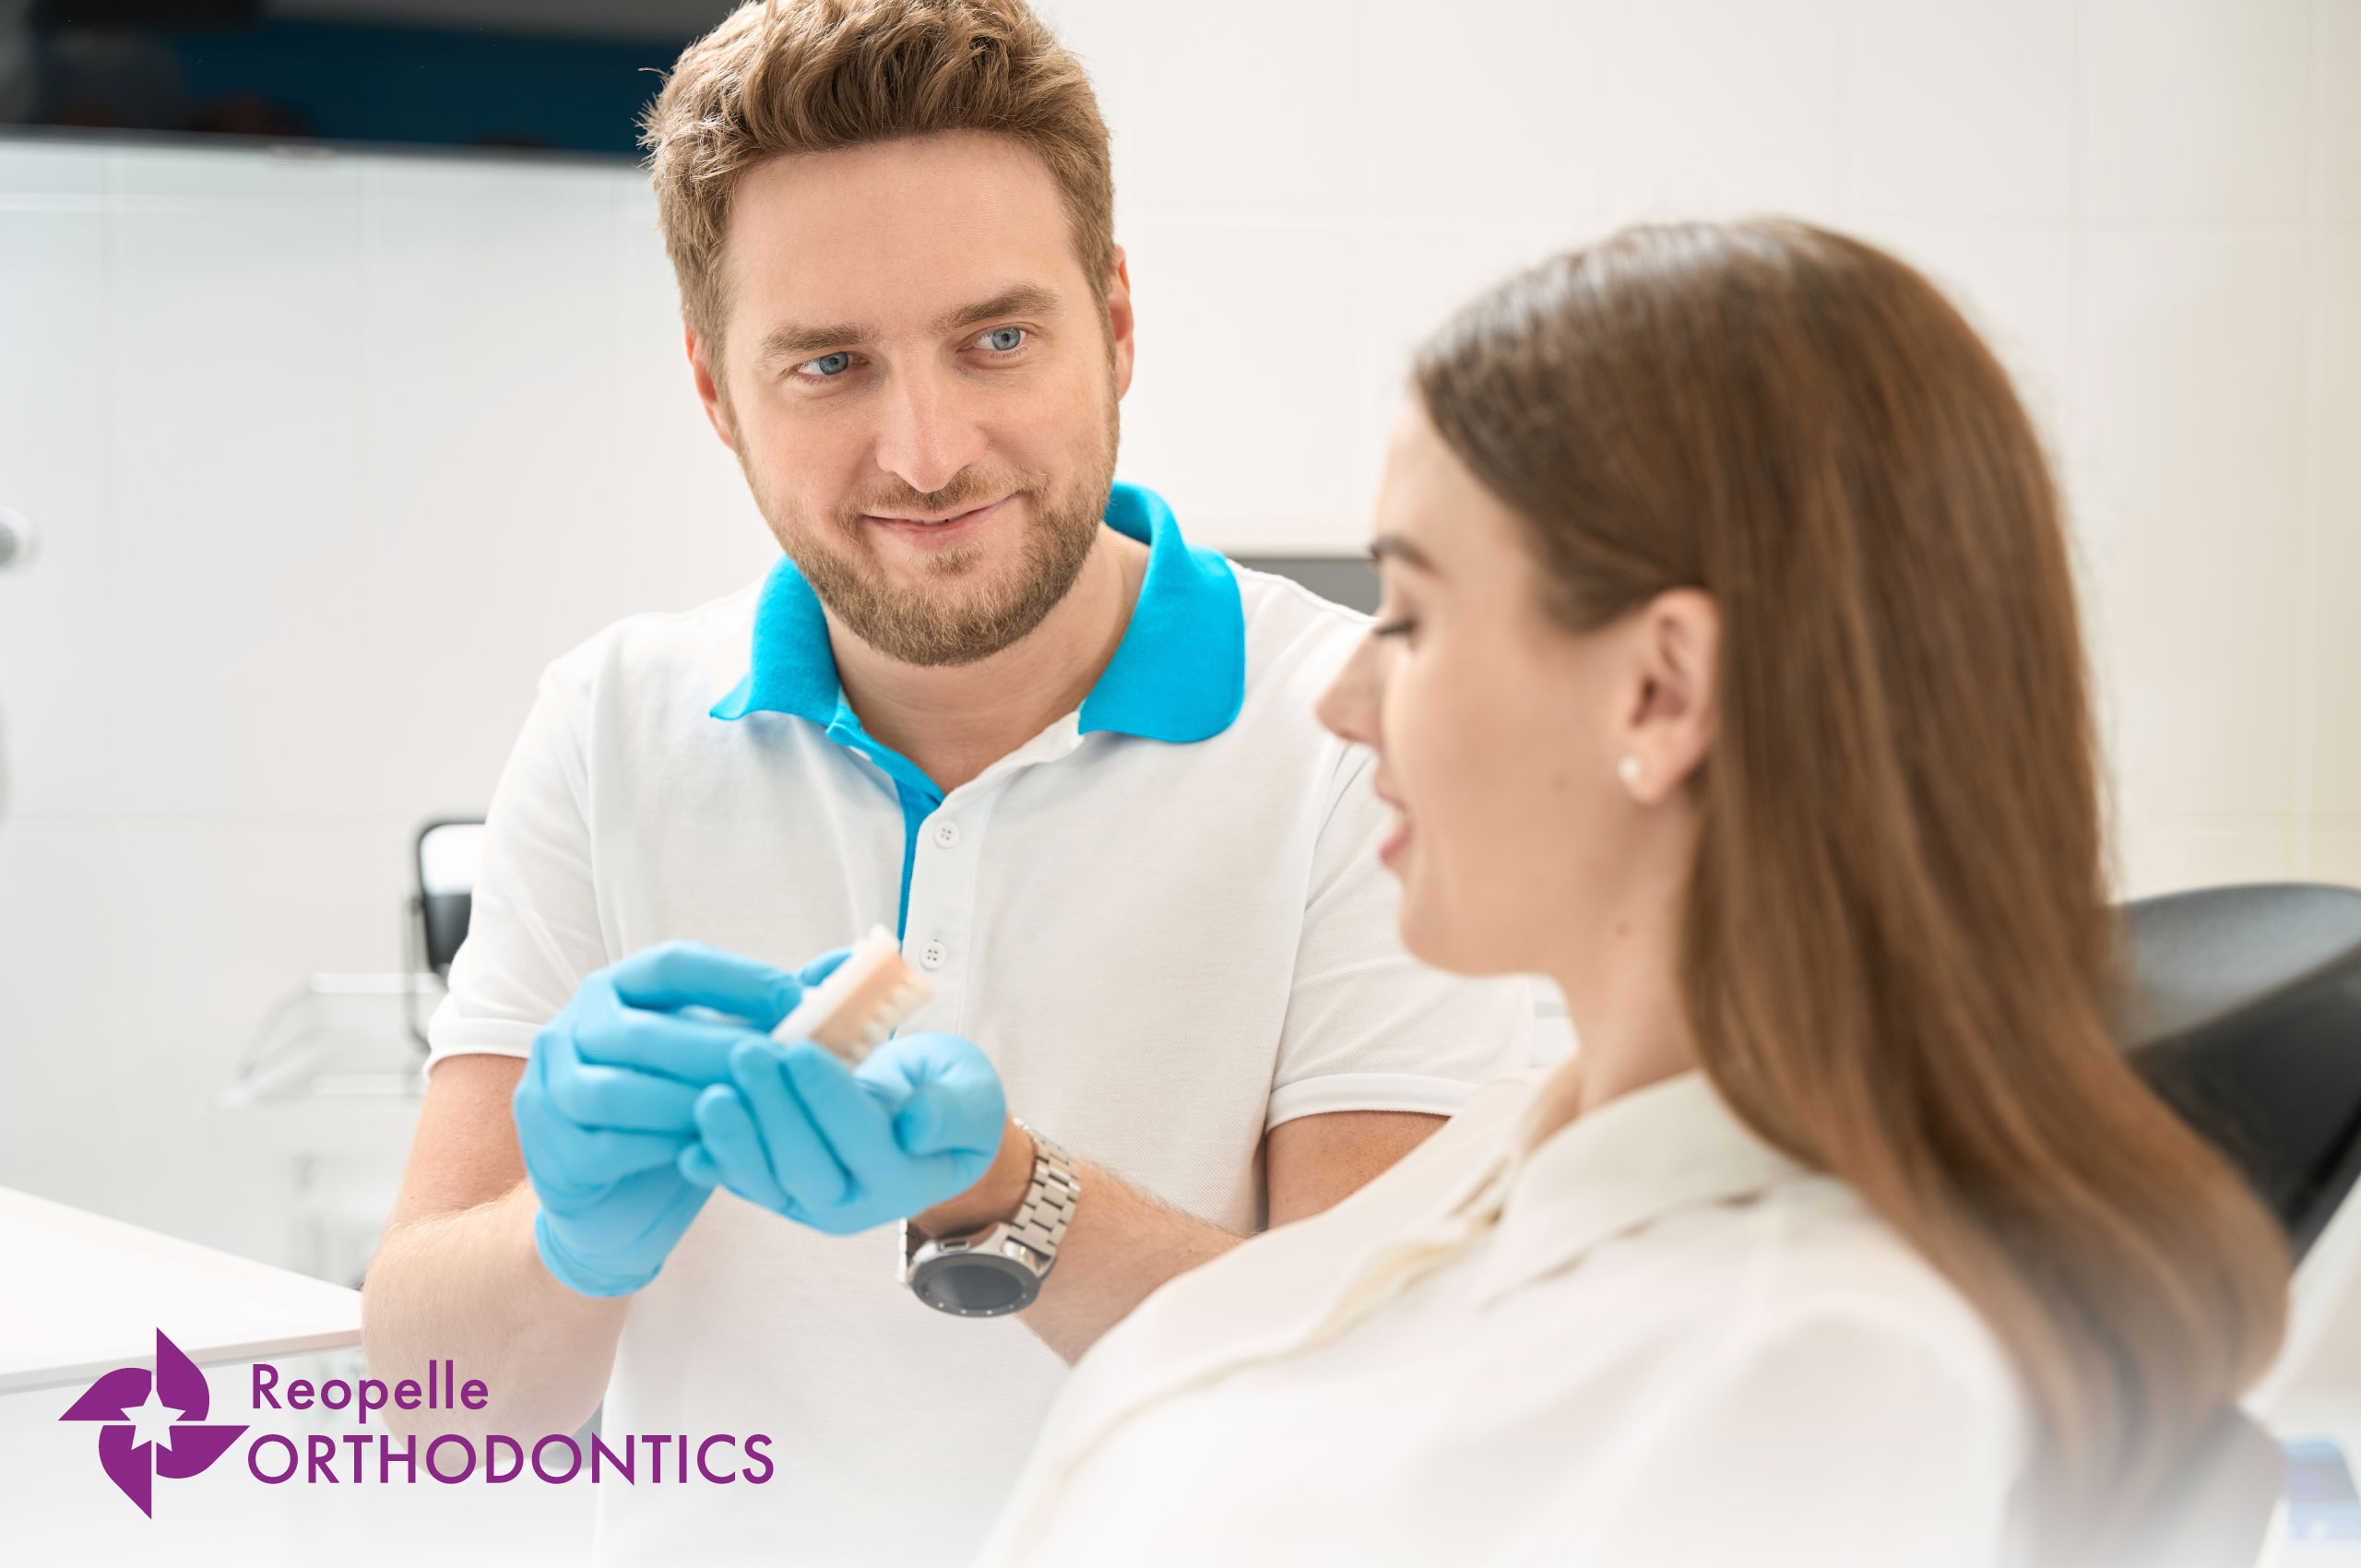 Orthodontic conditions can be easily solved with specialized help and patience.